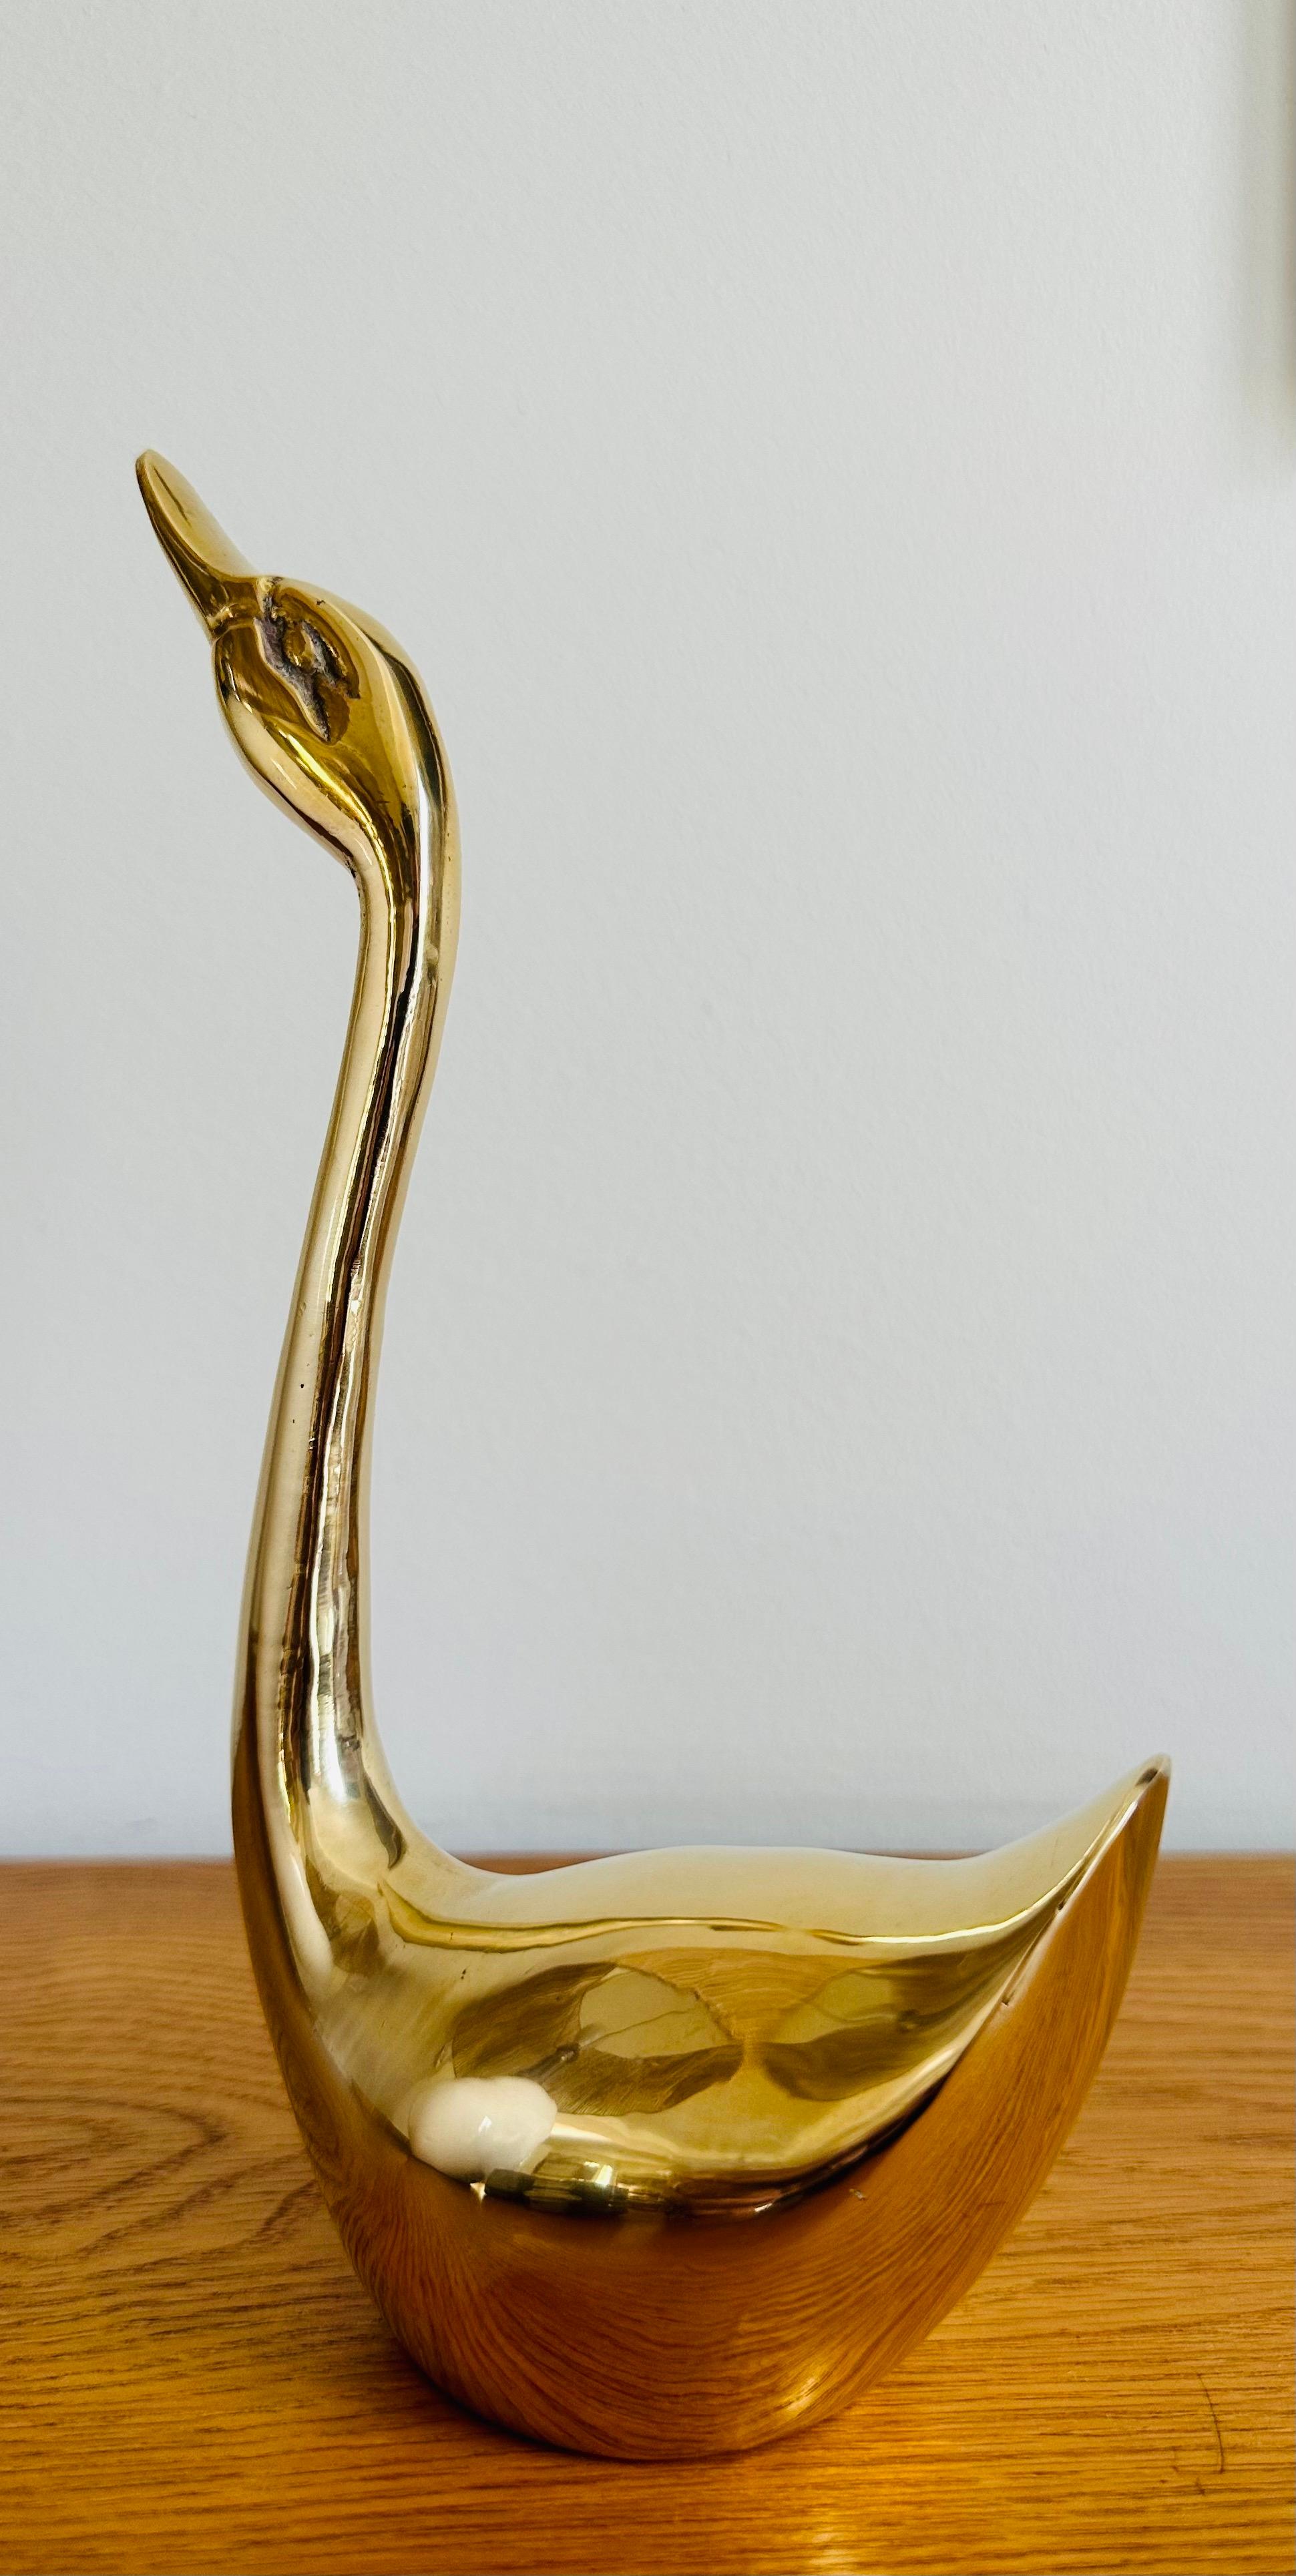 Vintage 1970s French Polished Brass Elegant Decorative Swan Paperweight 5